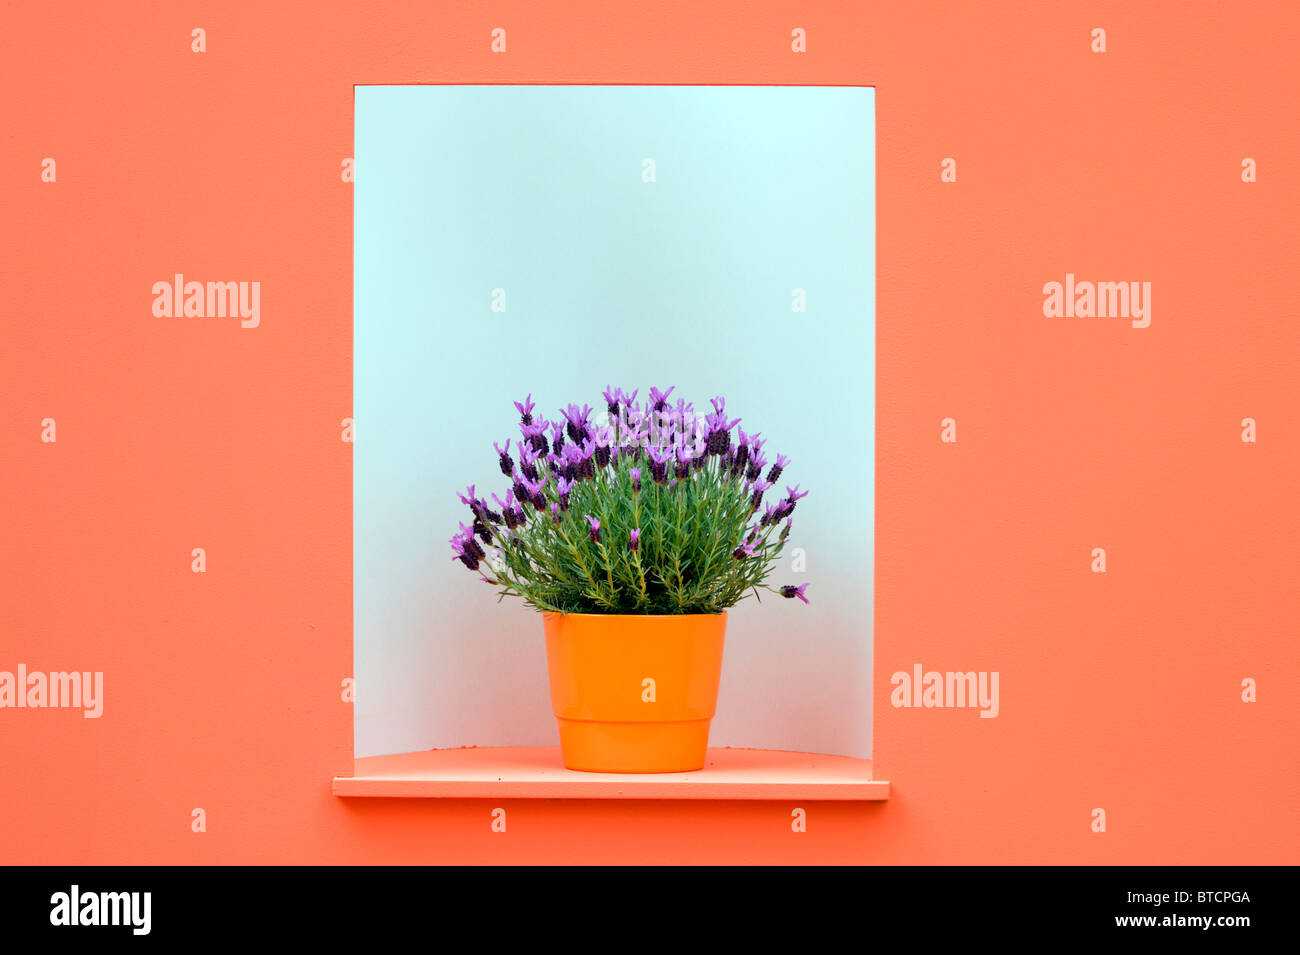 Flower pot with blue lavender in the orange and white wall frame. Stock Photo